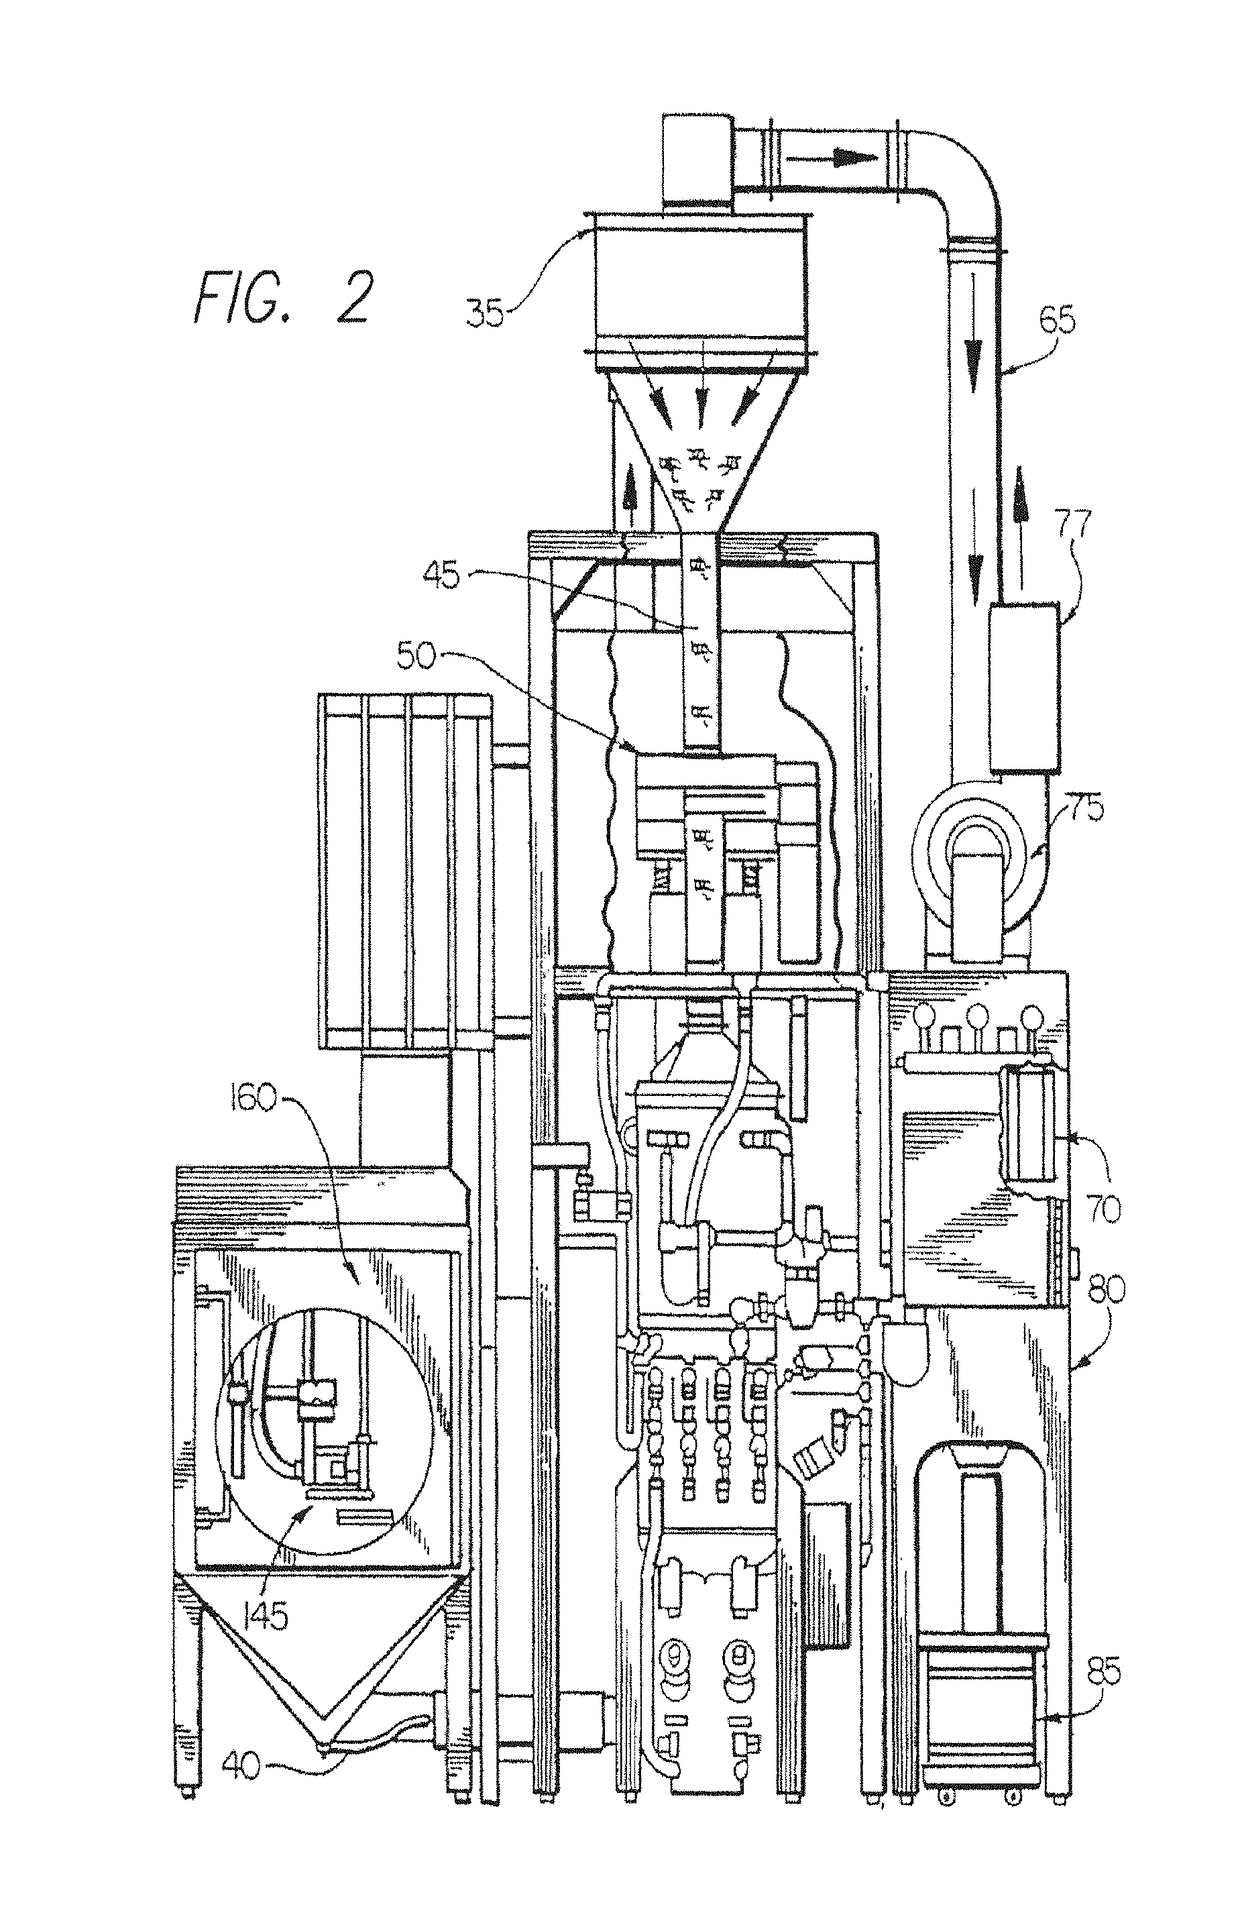 Apparatus and method for processing a workpiece